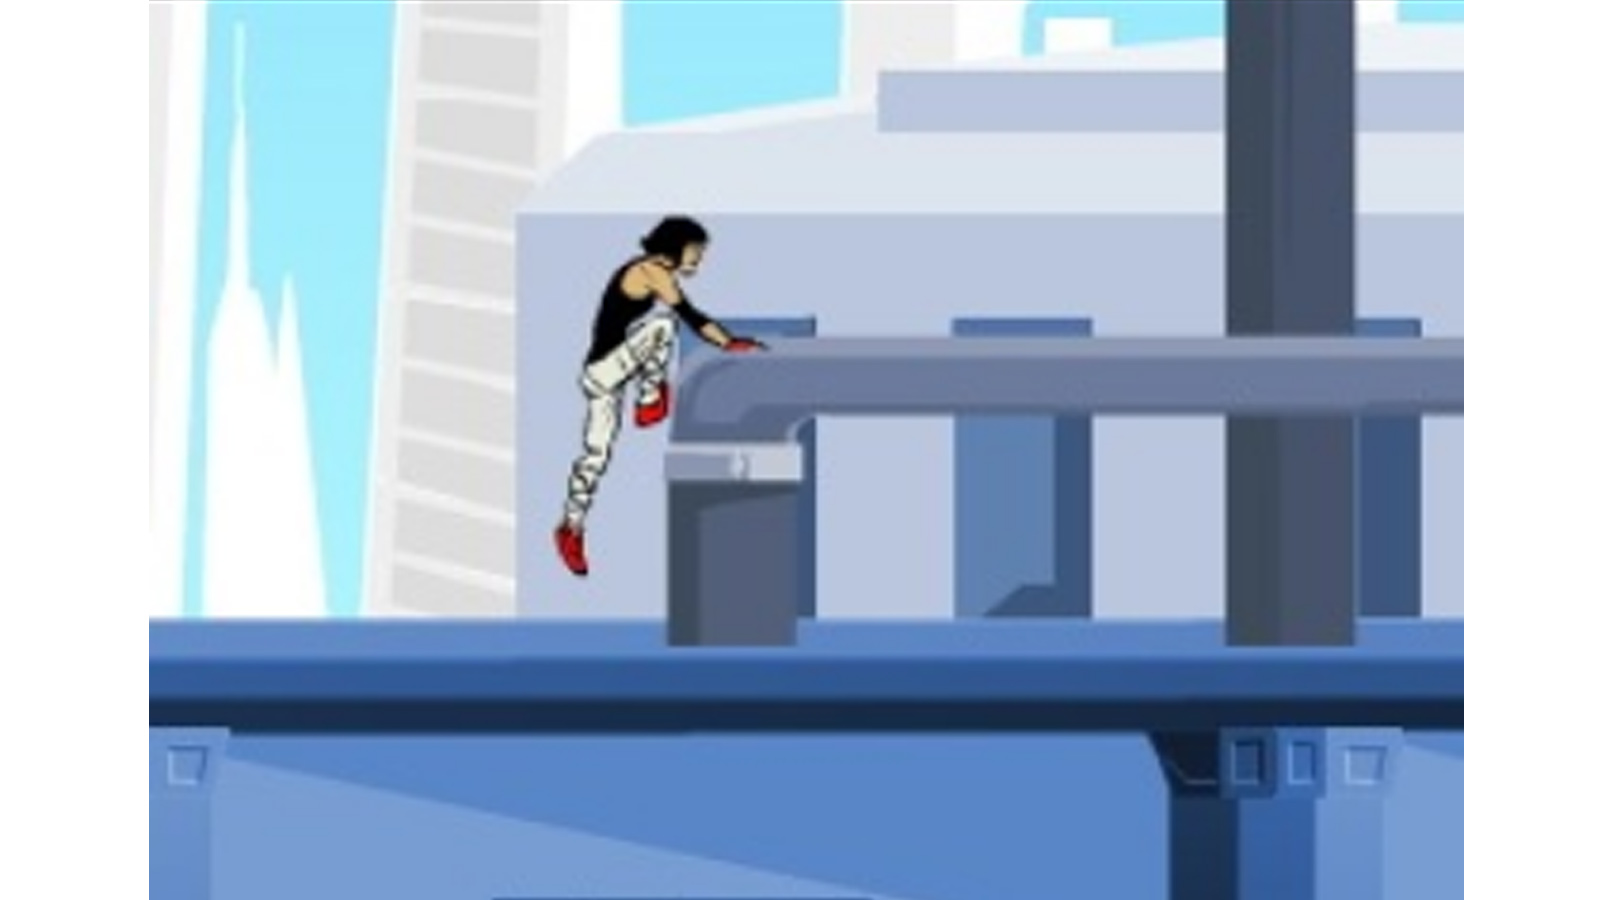 Get feedback from a vast remote working audience about Mirror's Edge 2D